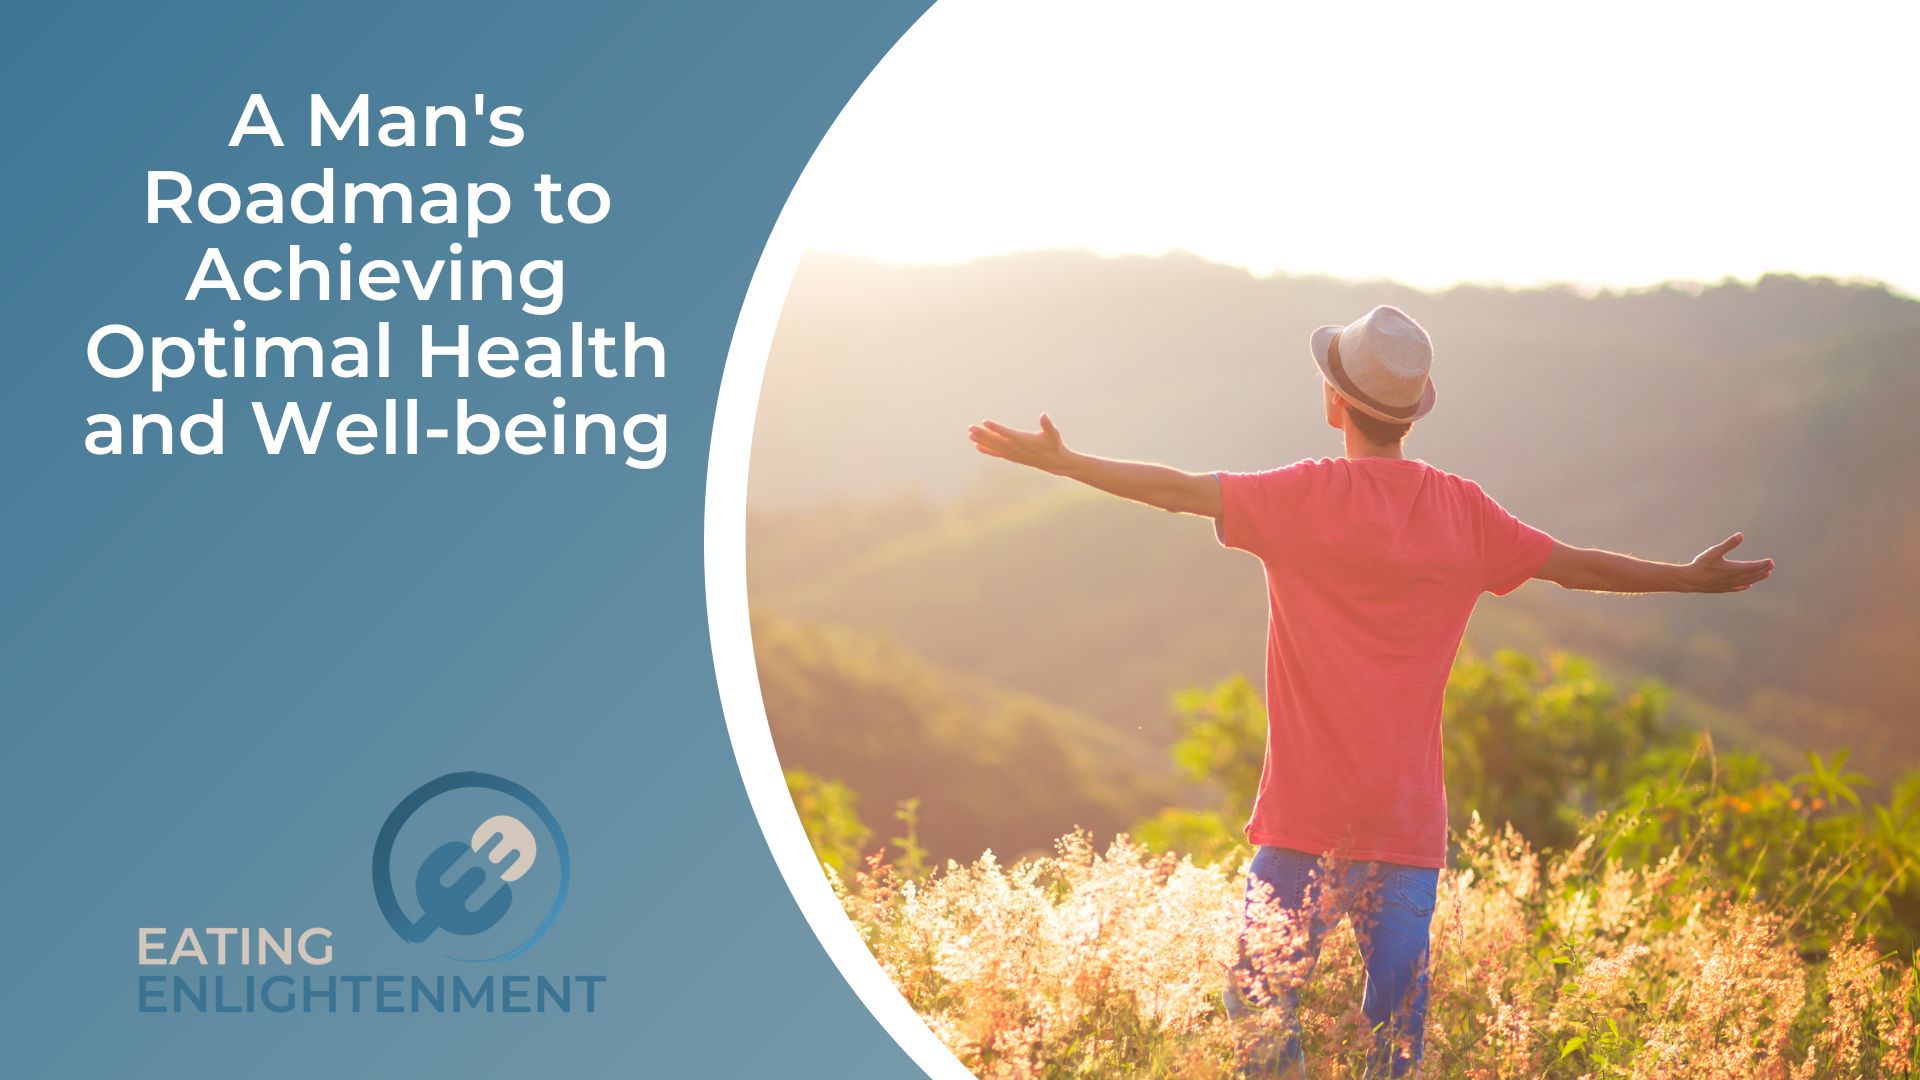 A Man's Roadmap to Achieving Optimal Health and Well-being